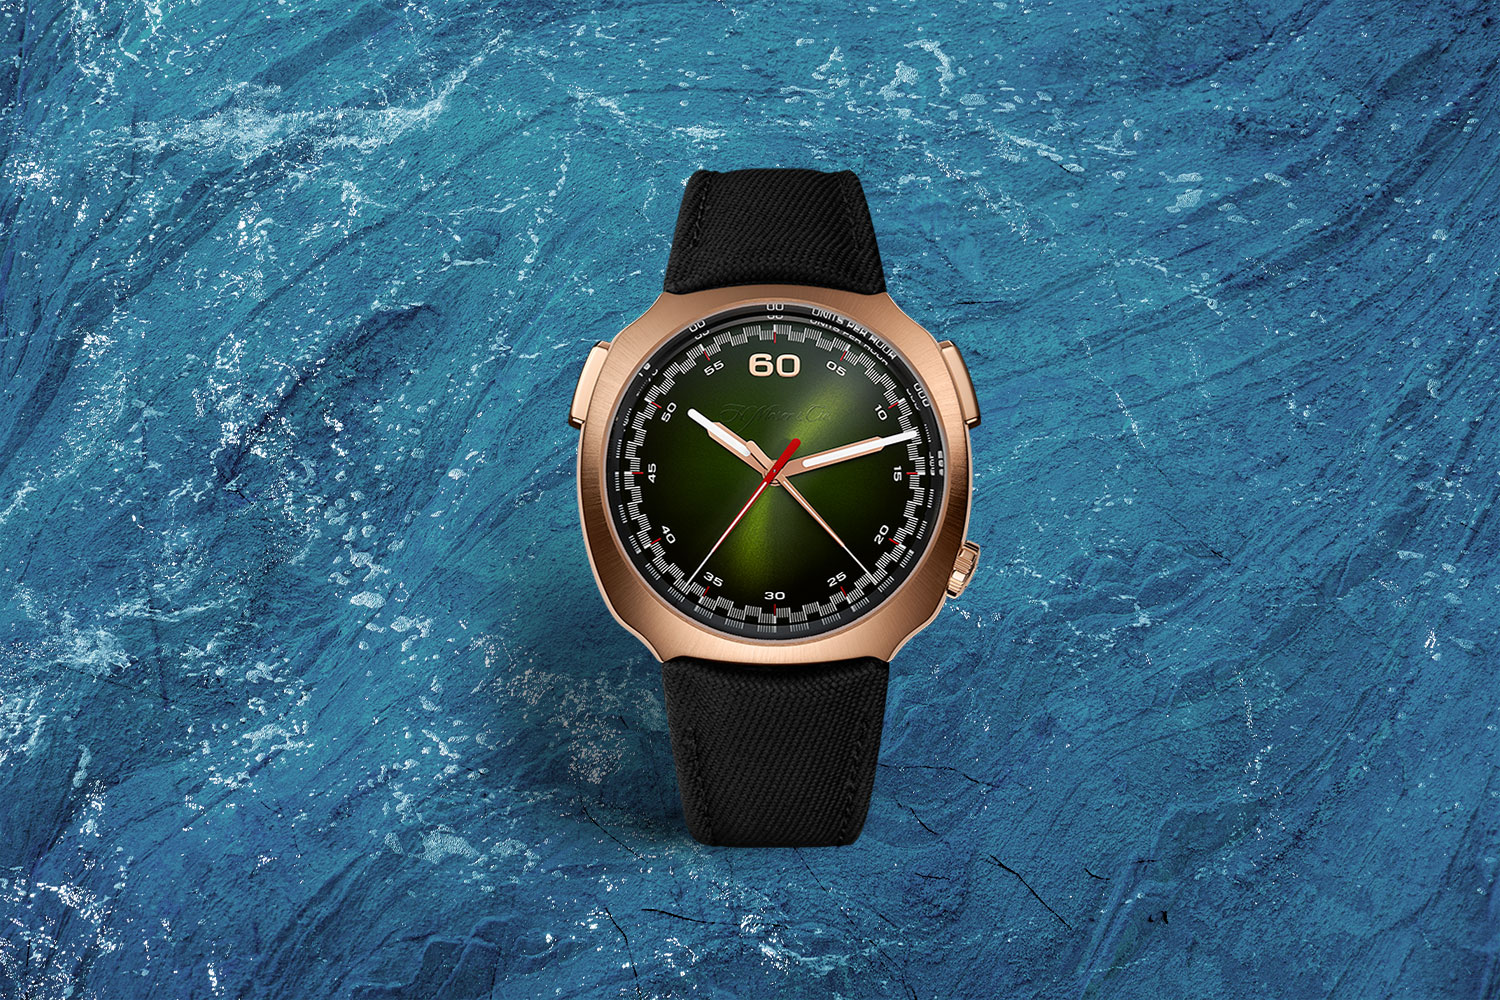 Green, black and gold watch.